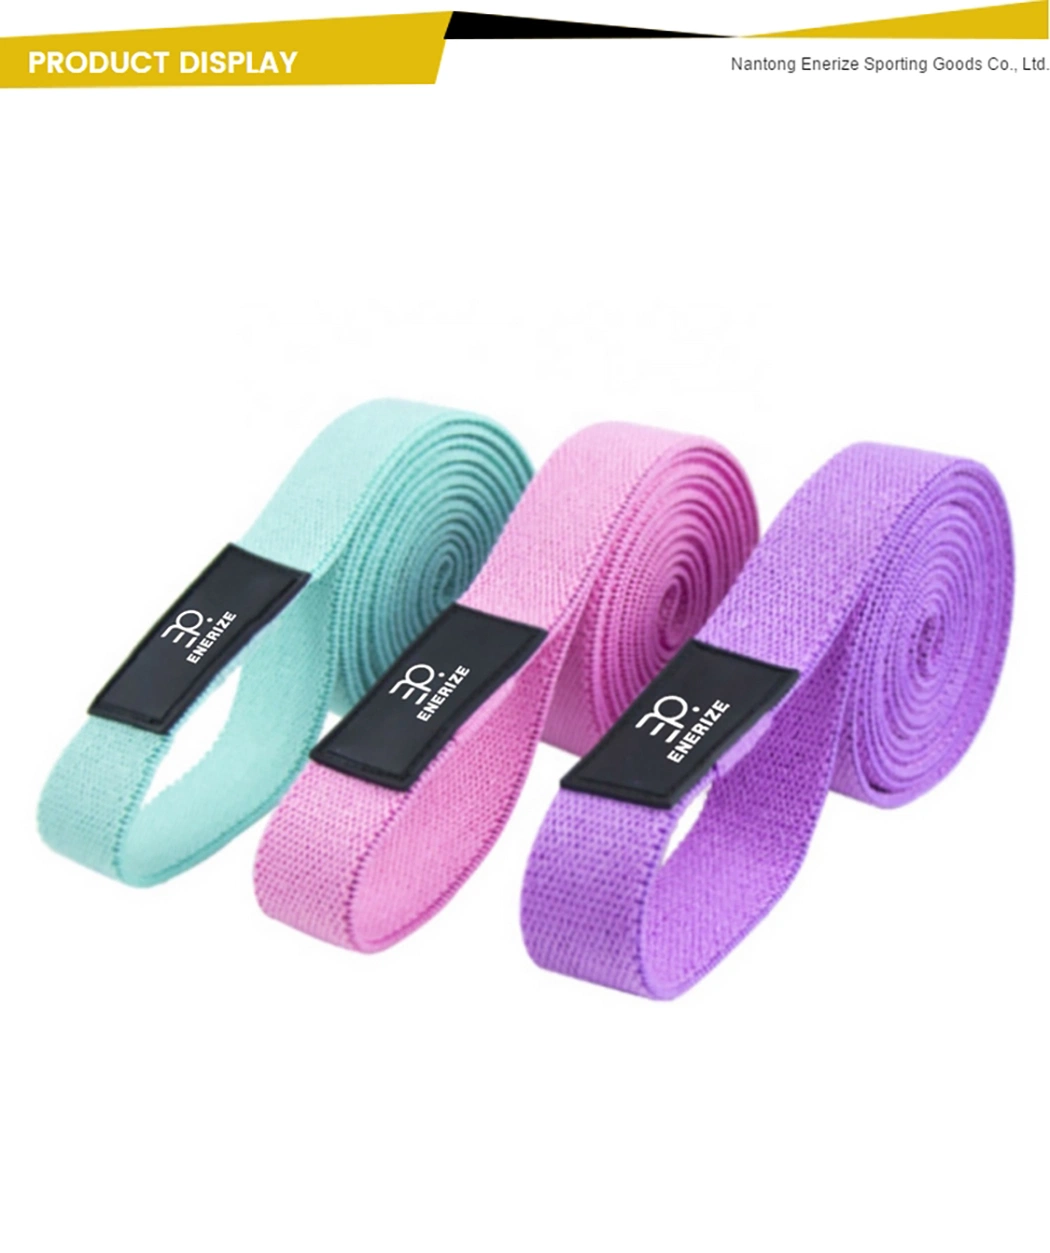 Custom Logo Printed Yoga Gym Exercise Fitness for Legs Glutes Booty Hip Fabric Resistance Bands